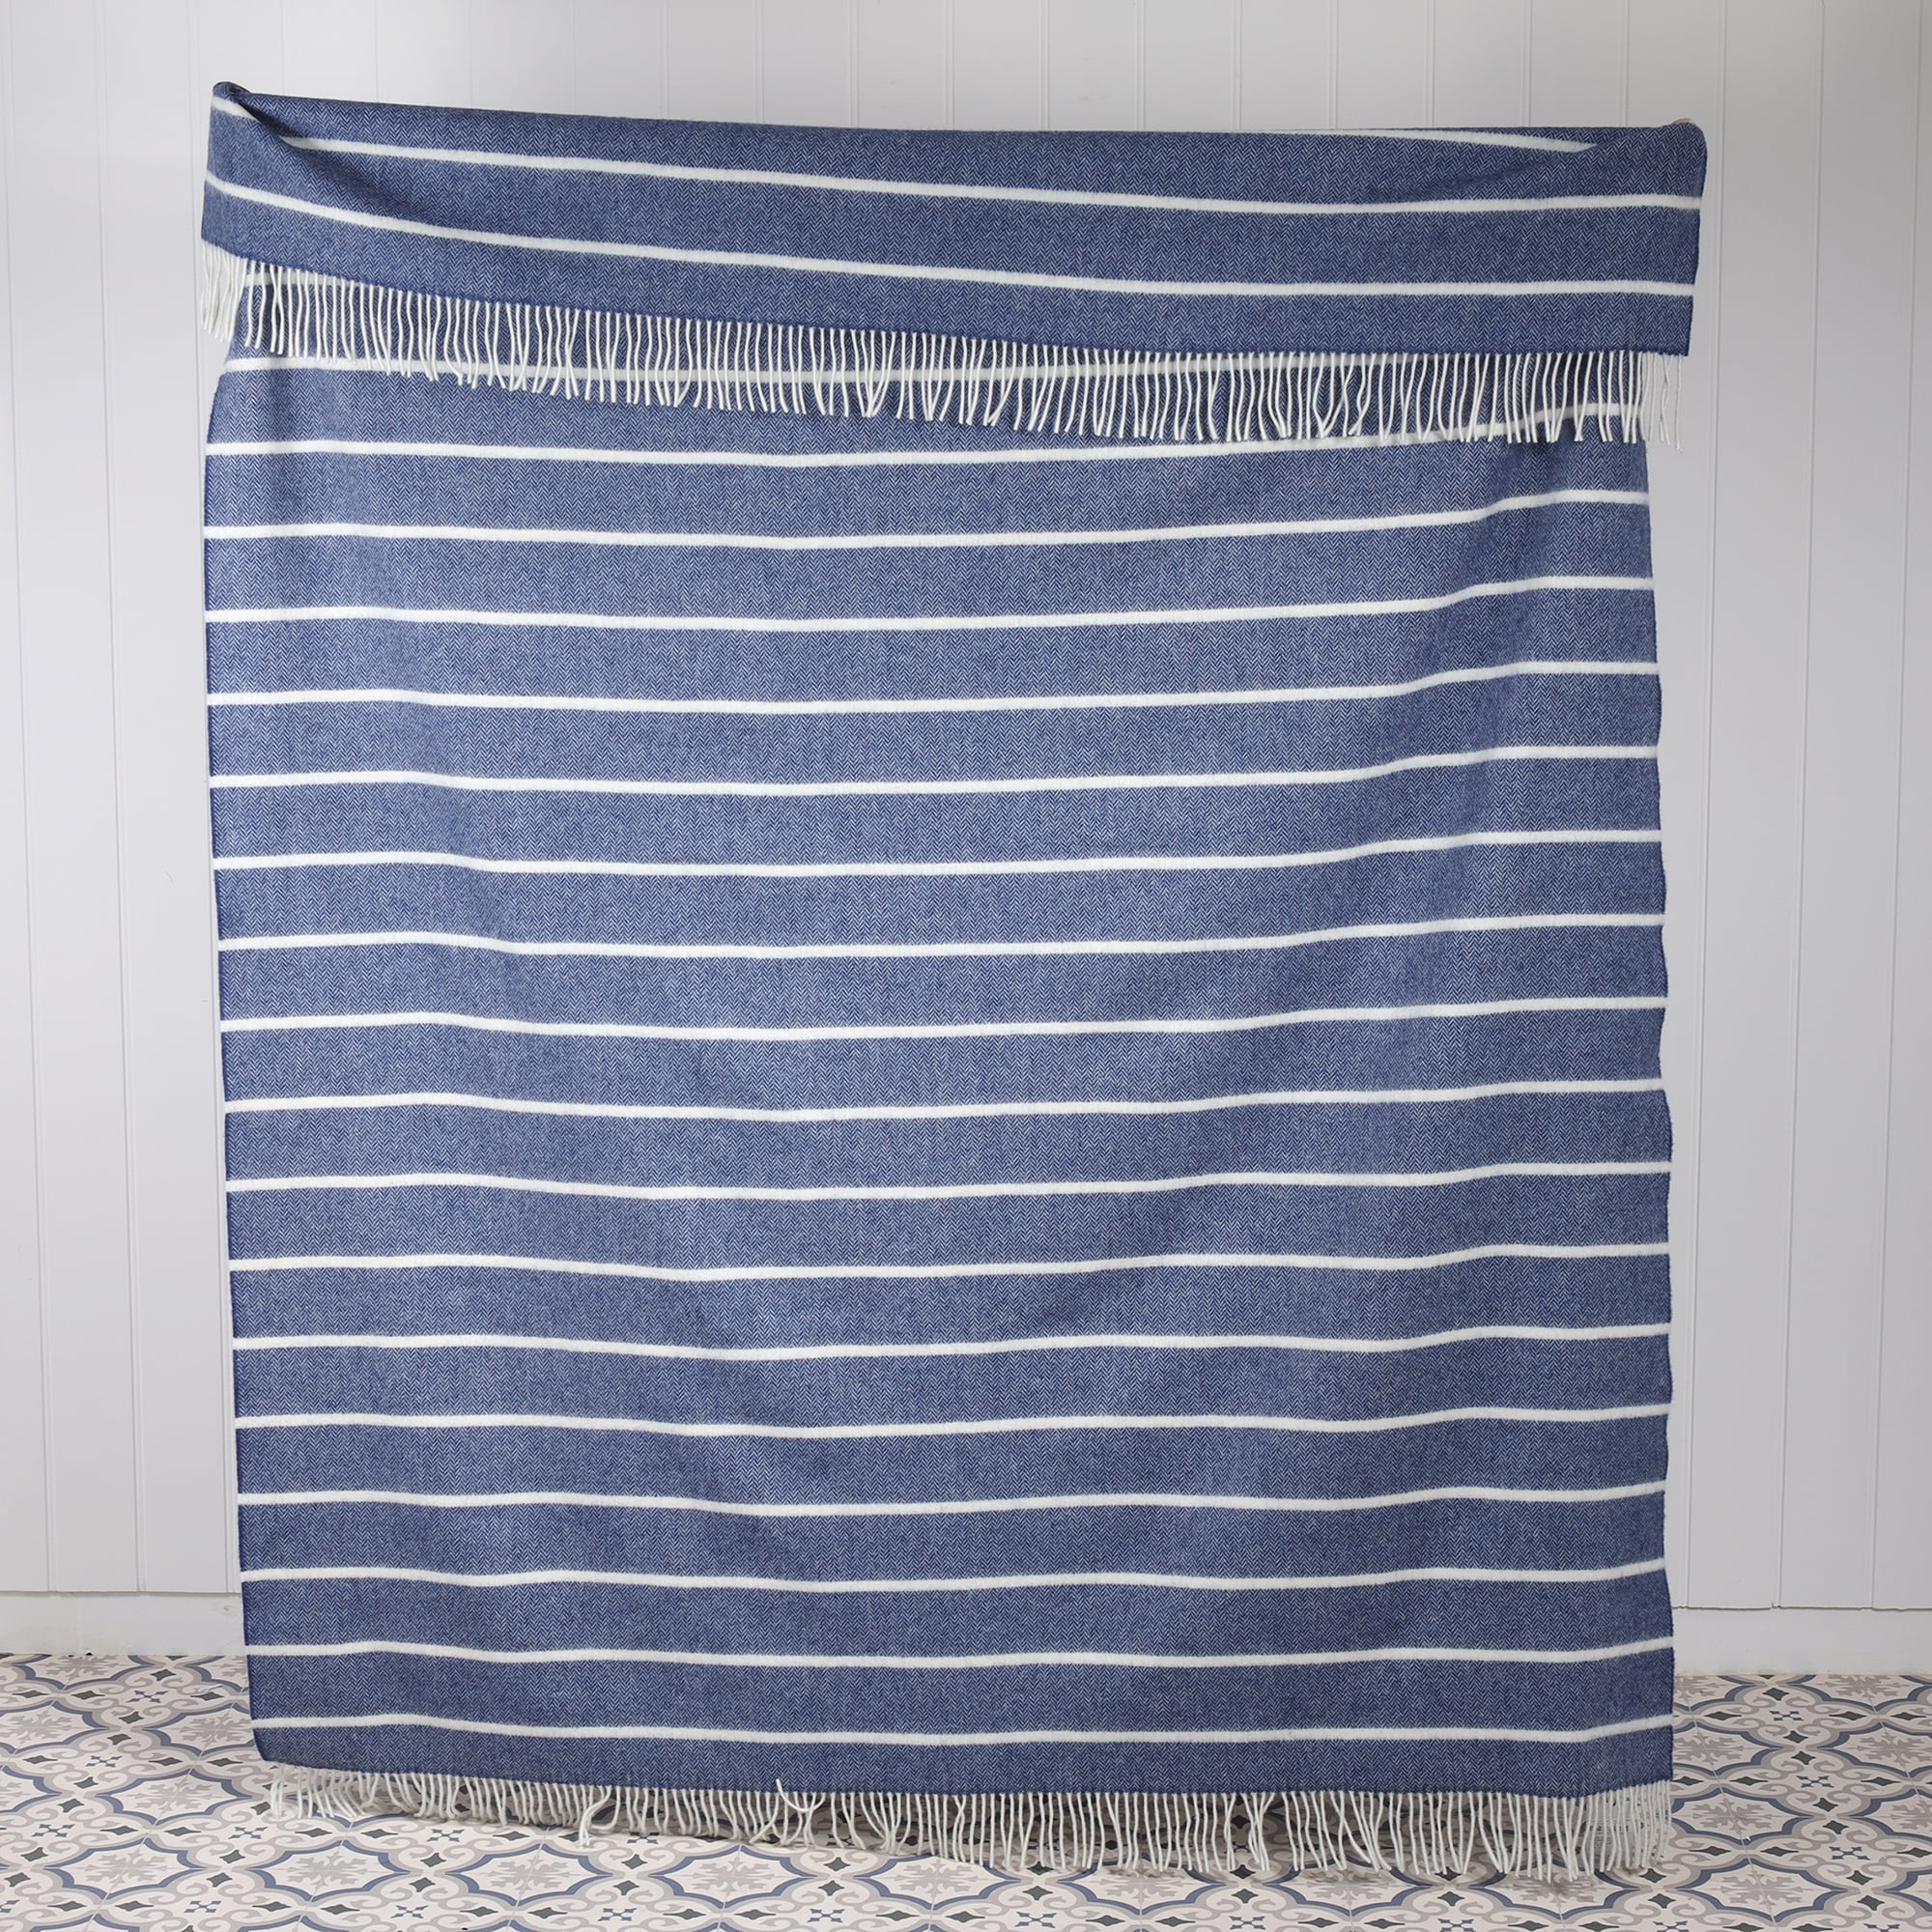 Lambswool Denim and White striped throw spread across against a white tongue and Grooved wall